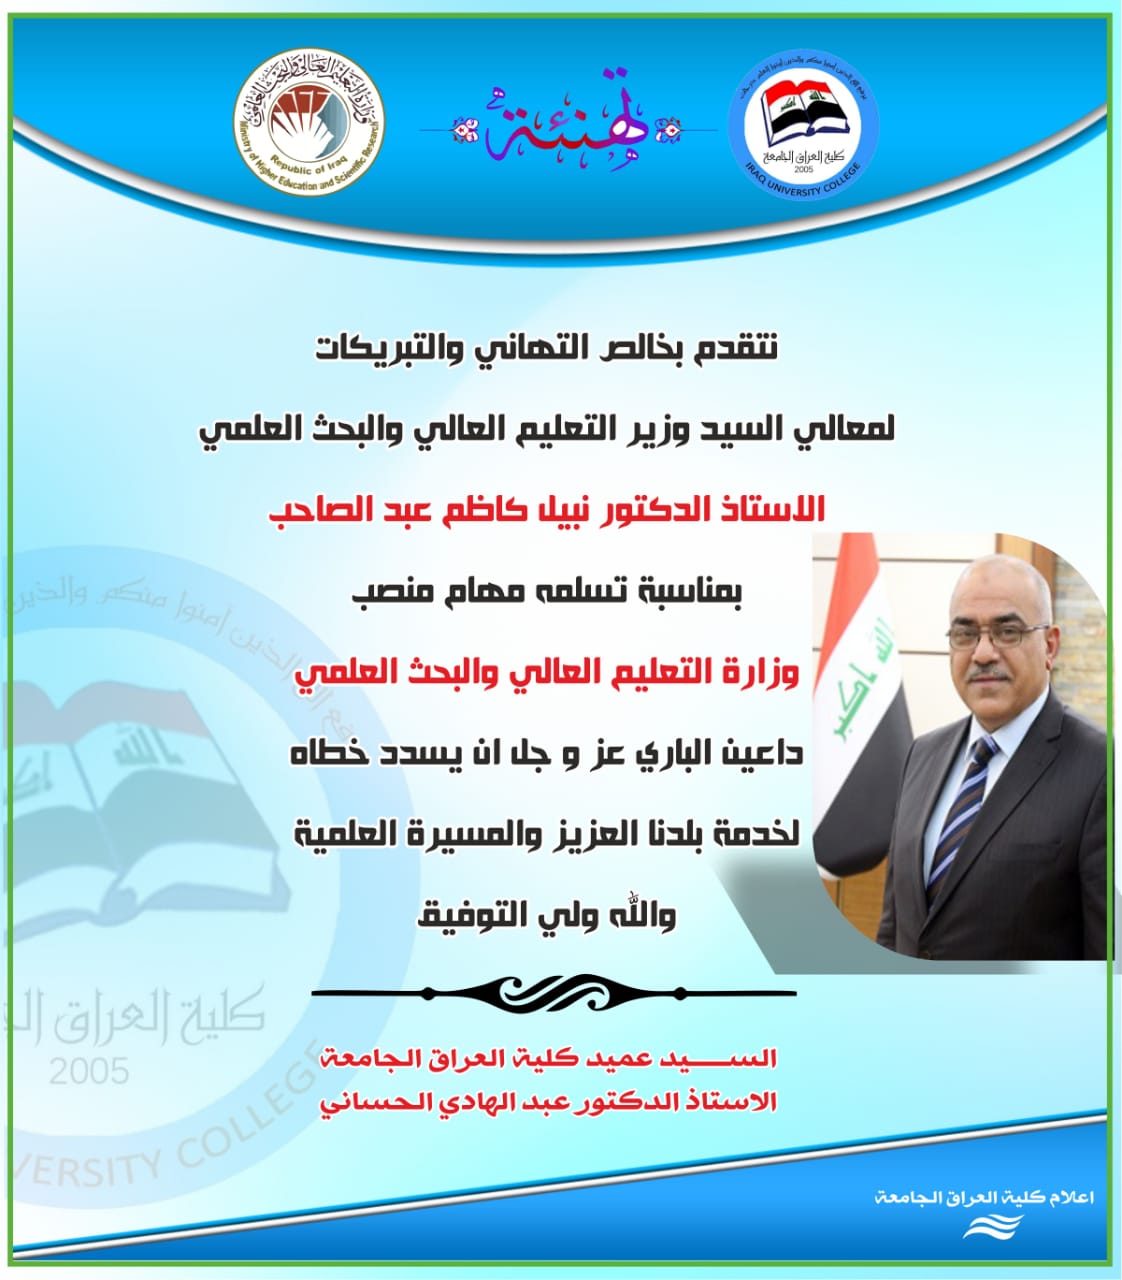 Professor Dr Nabil Kazem Abdel Sahib On The Occasion Of Taking Office Ministry Of Higher Education And Scientific Research Iraq University College Iuc